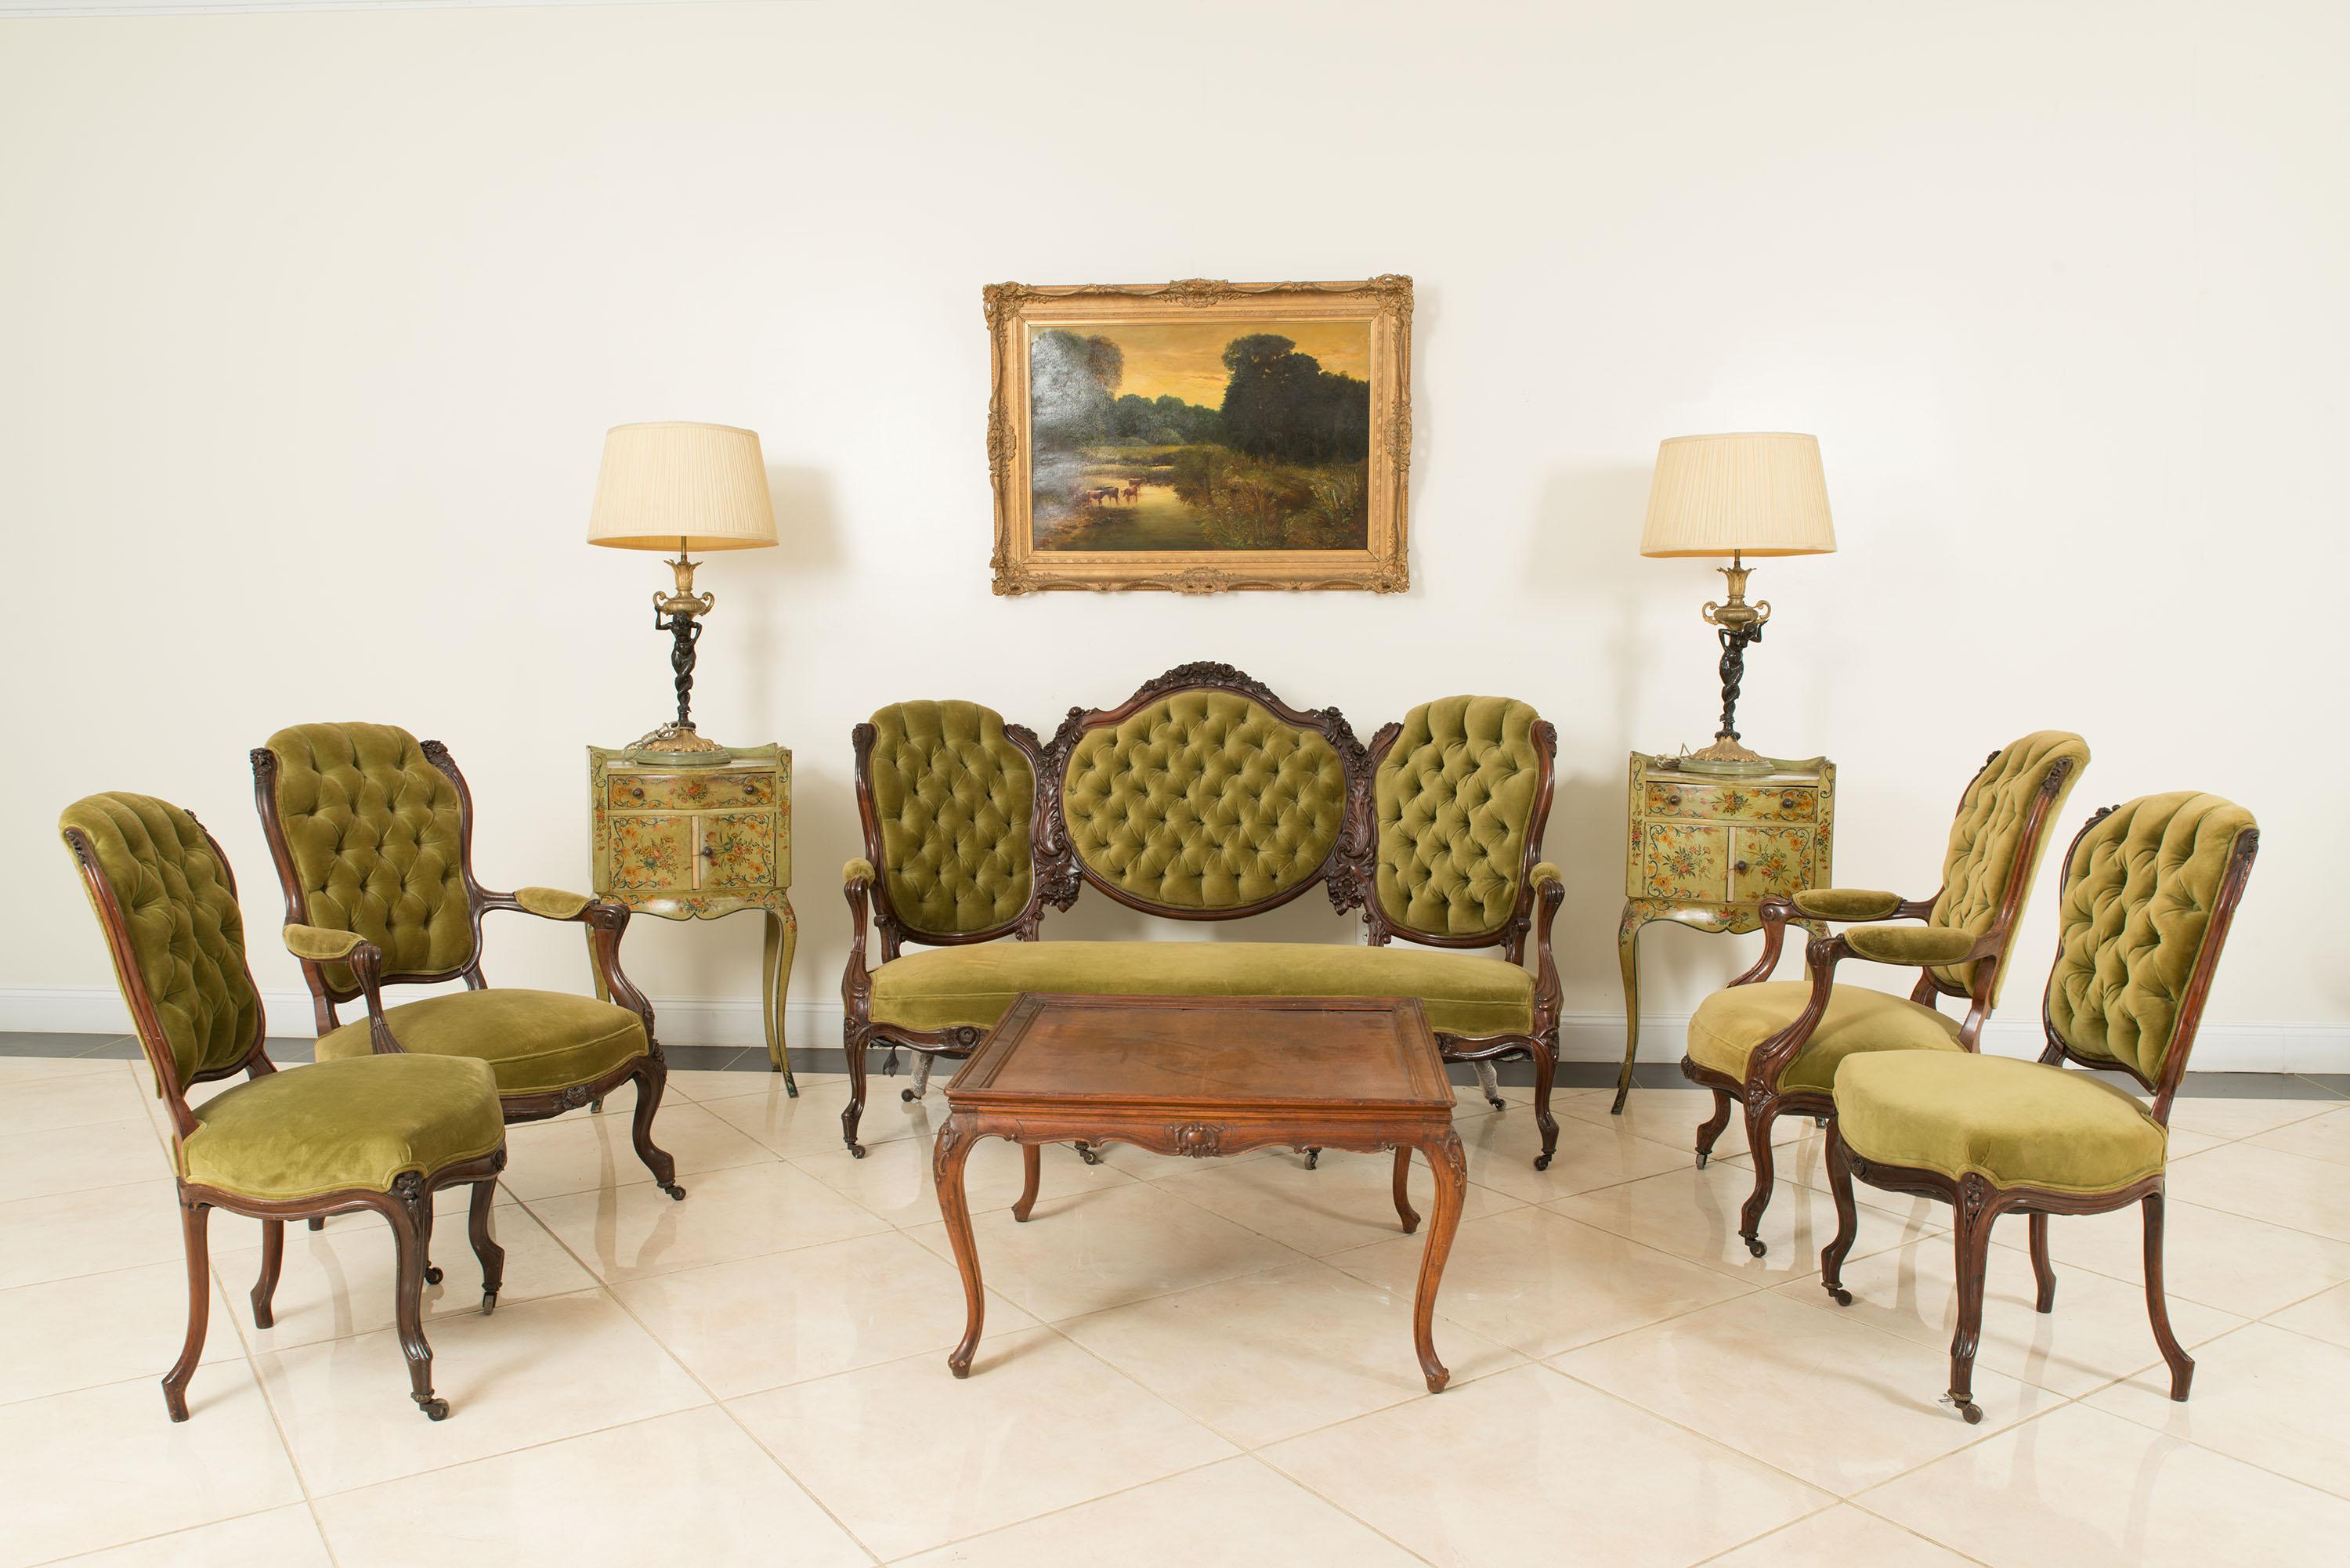 Set of 5 American Victorian carved rosewood salon set with tufted green velvet upholstery (settee: 66